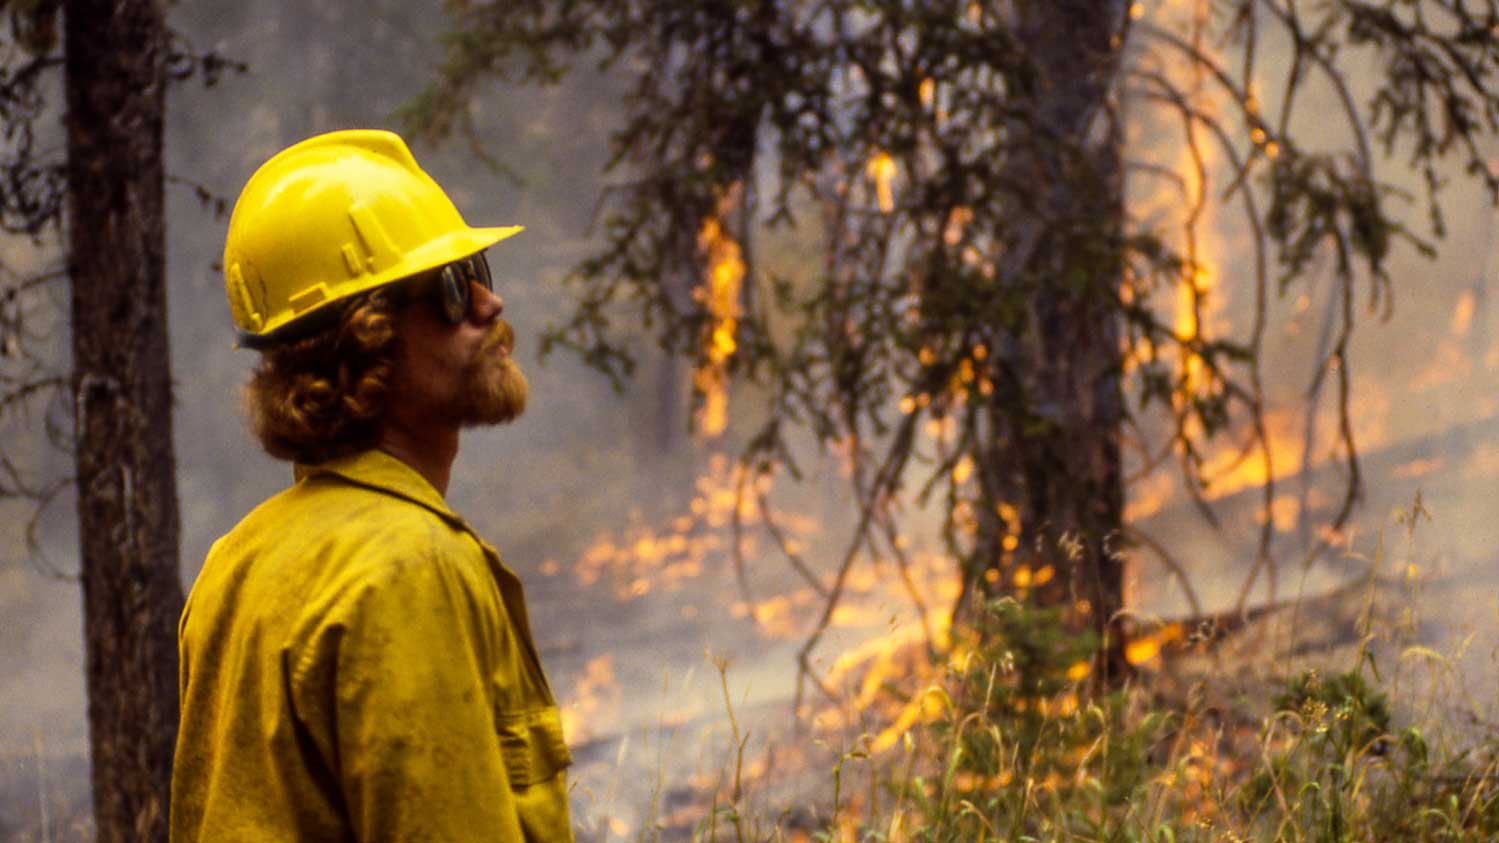 A firefighter watches the flames in Yellowstone National Park during the 1988 fires.